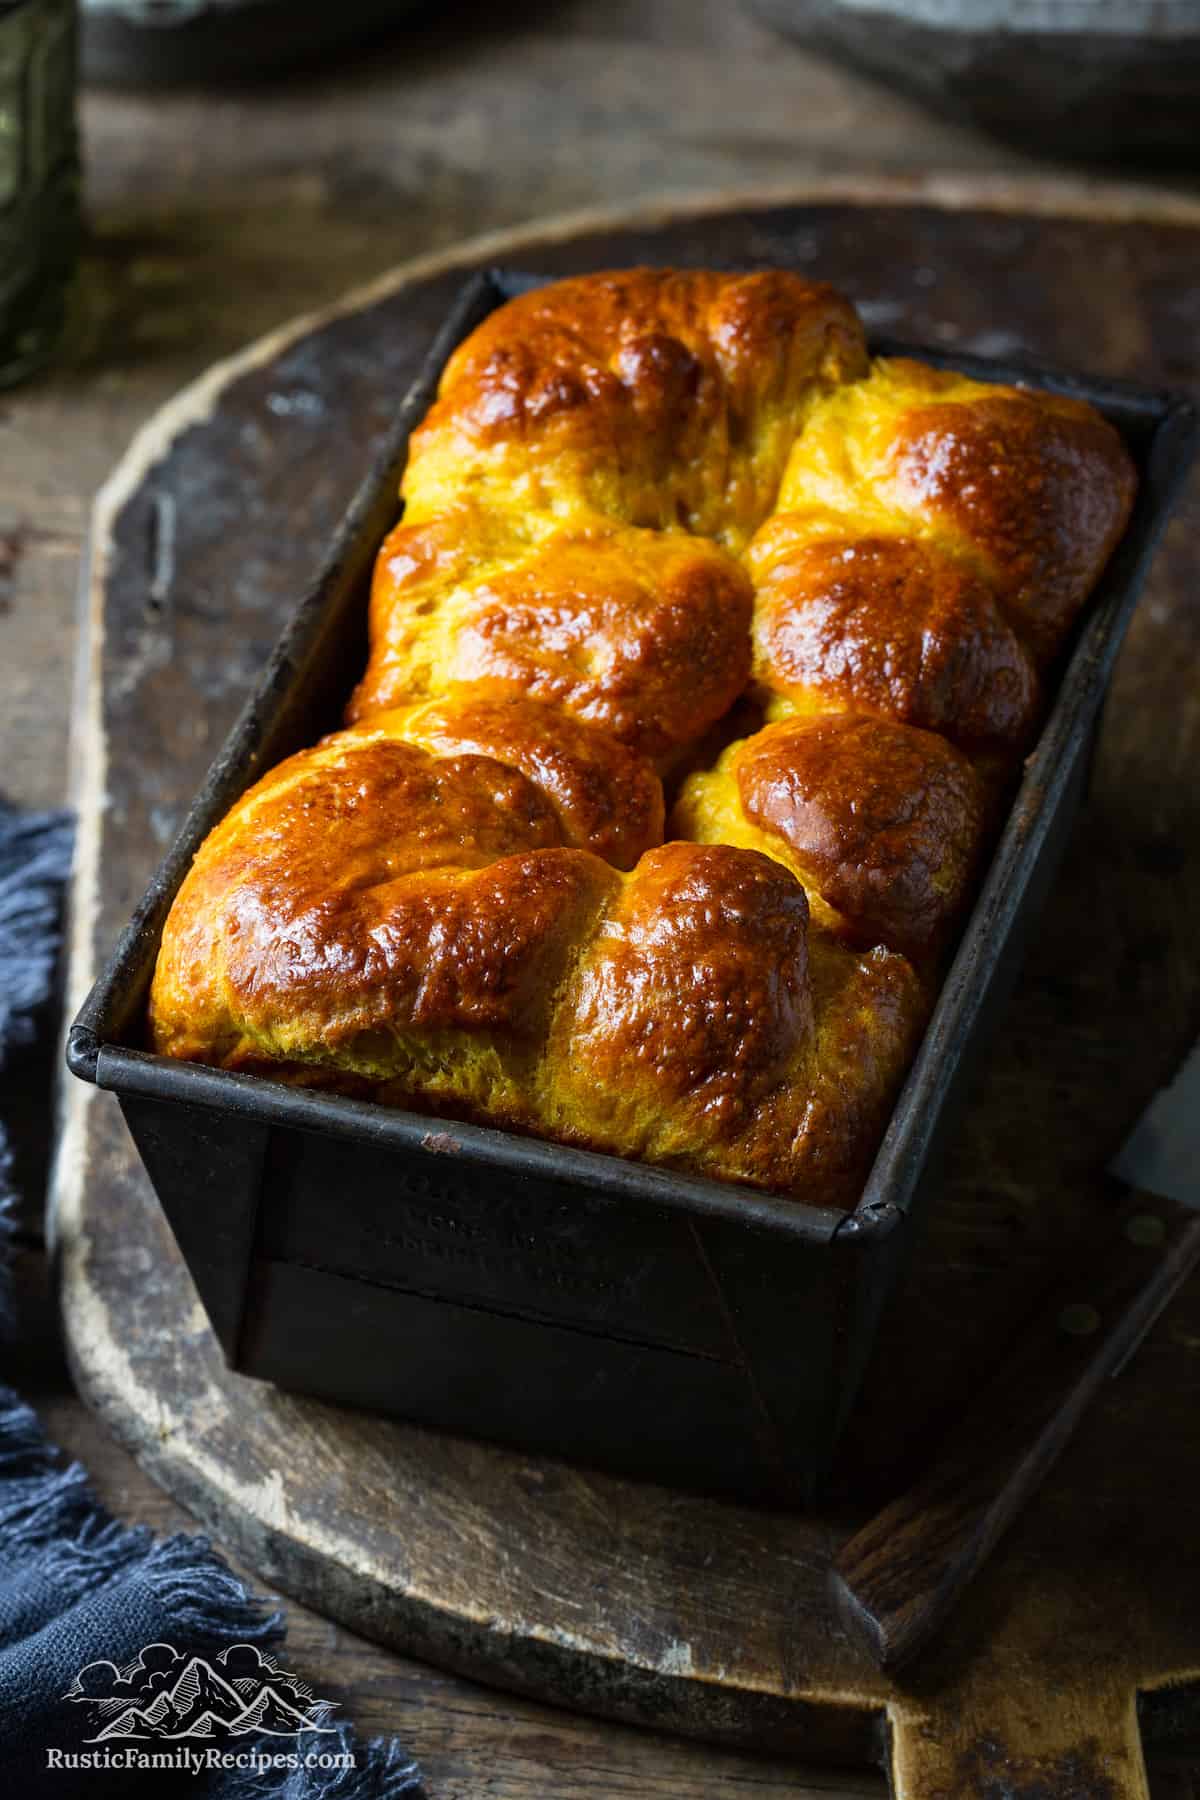 A loaf of pumpkin brioche fresh out of the oven cooling on a wooden tray.